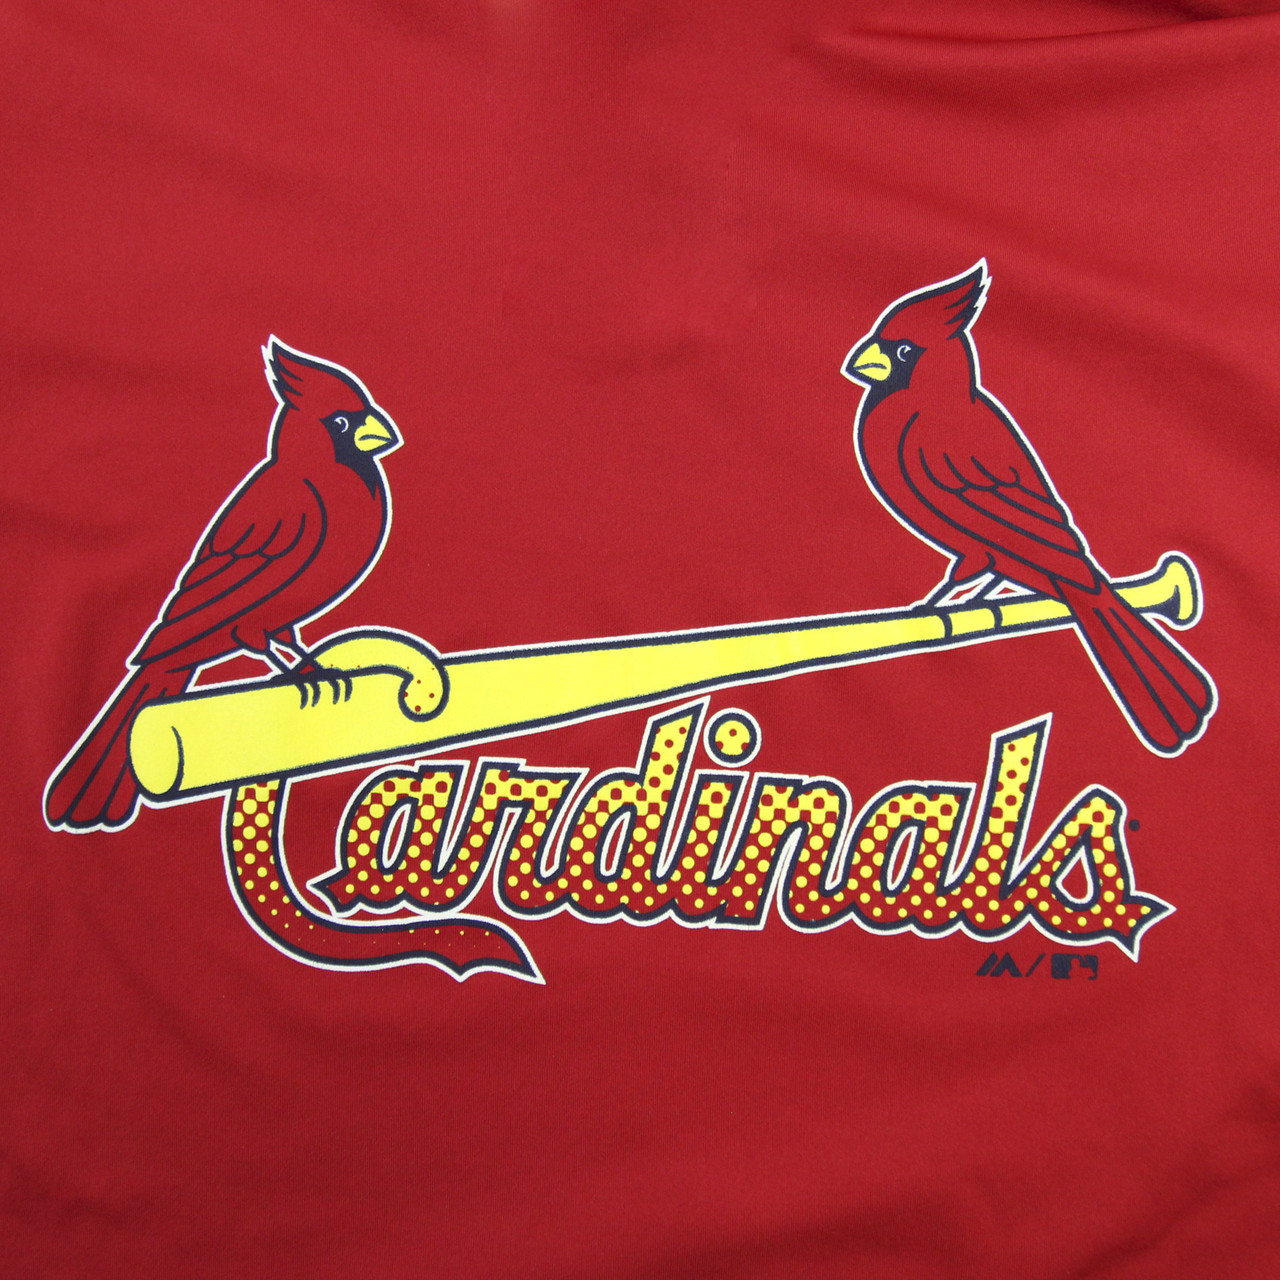 St Louis Cardinals Apparel | Clothing and Gear for St Louis Cardinals Fans